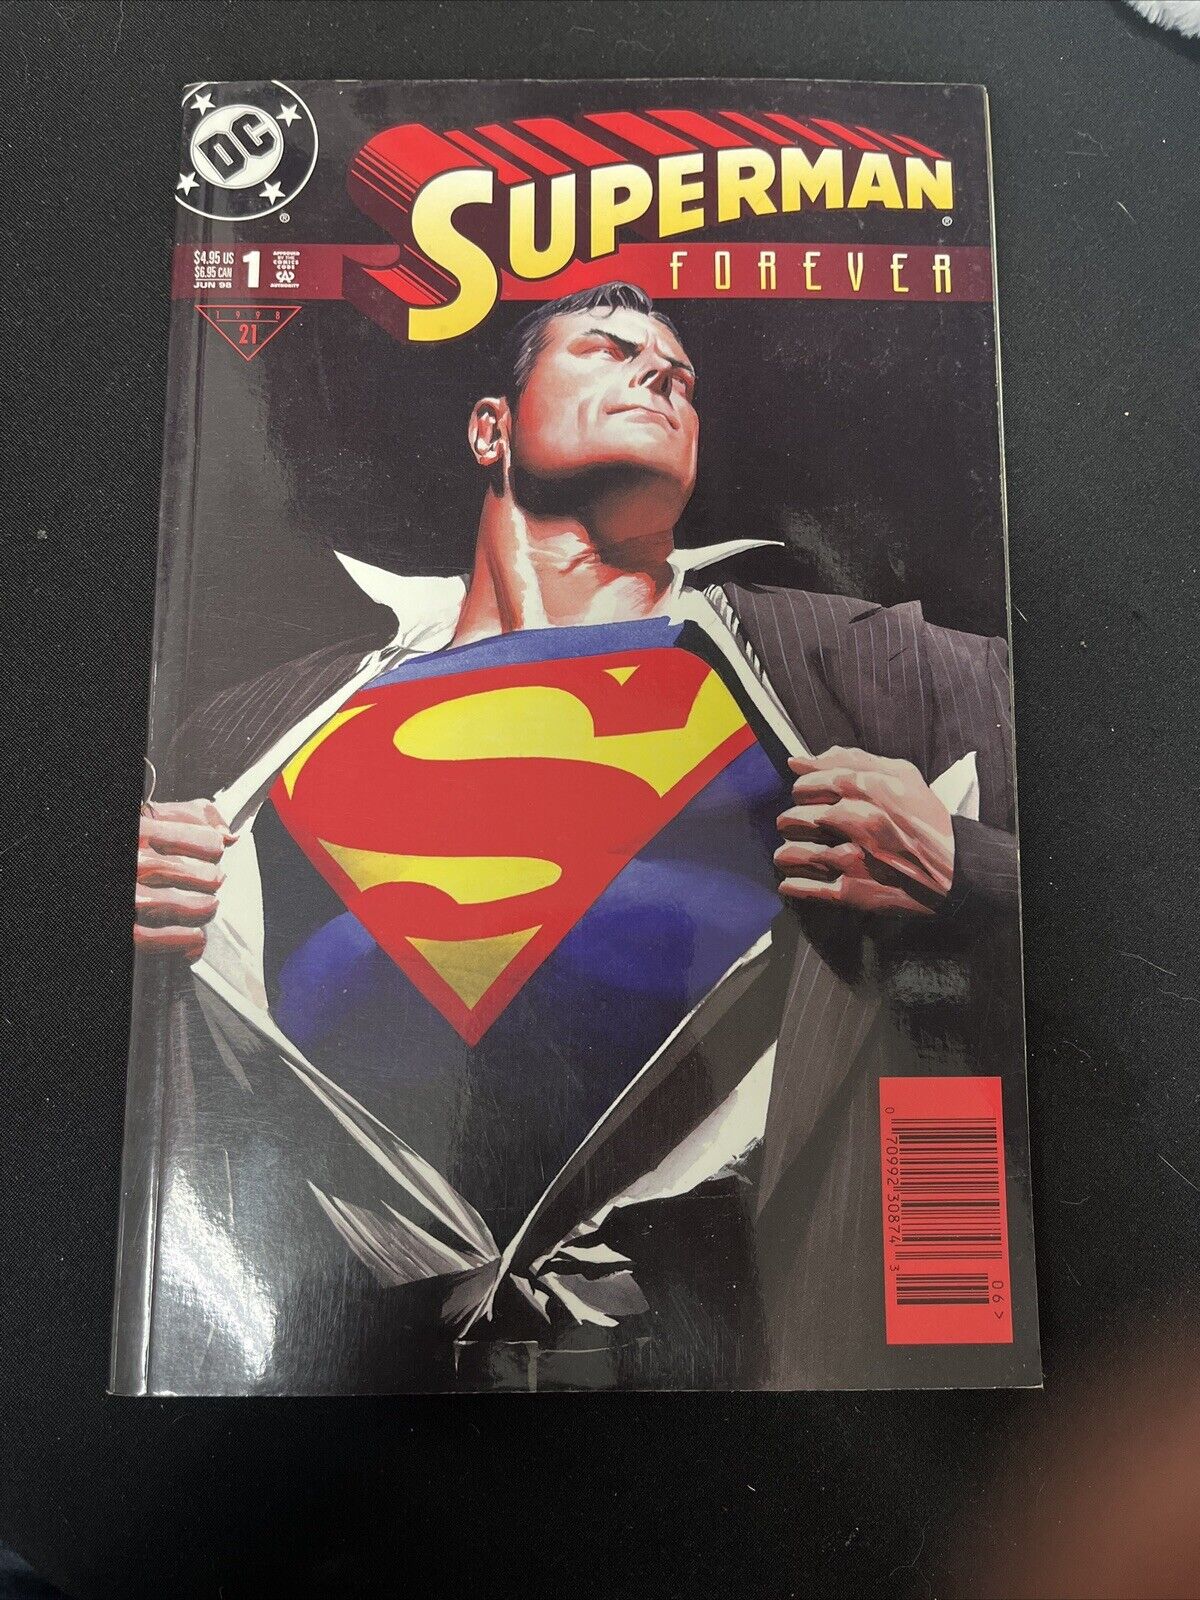 Superman Forever #1 First Issue June 1998 DC 90s Comics